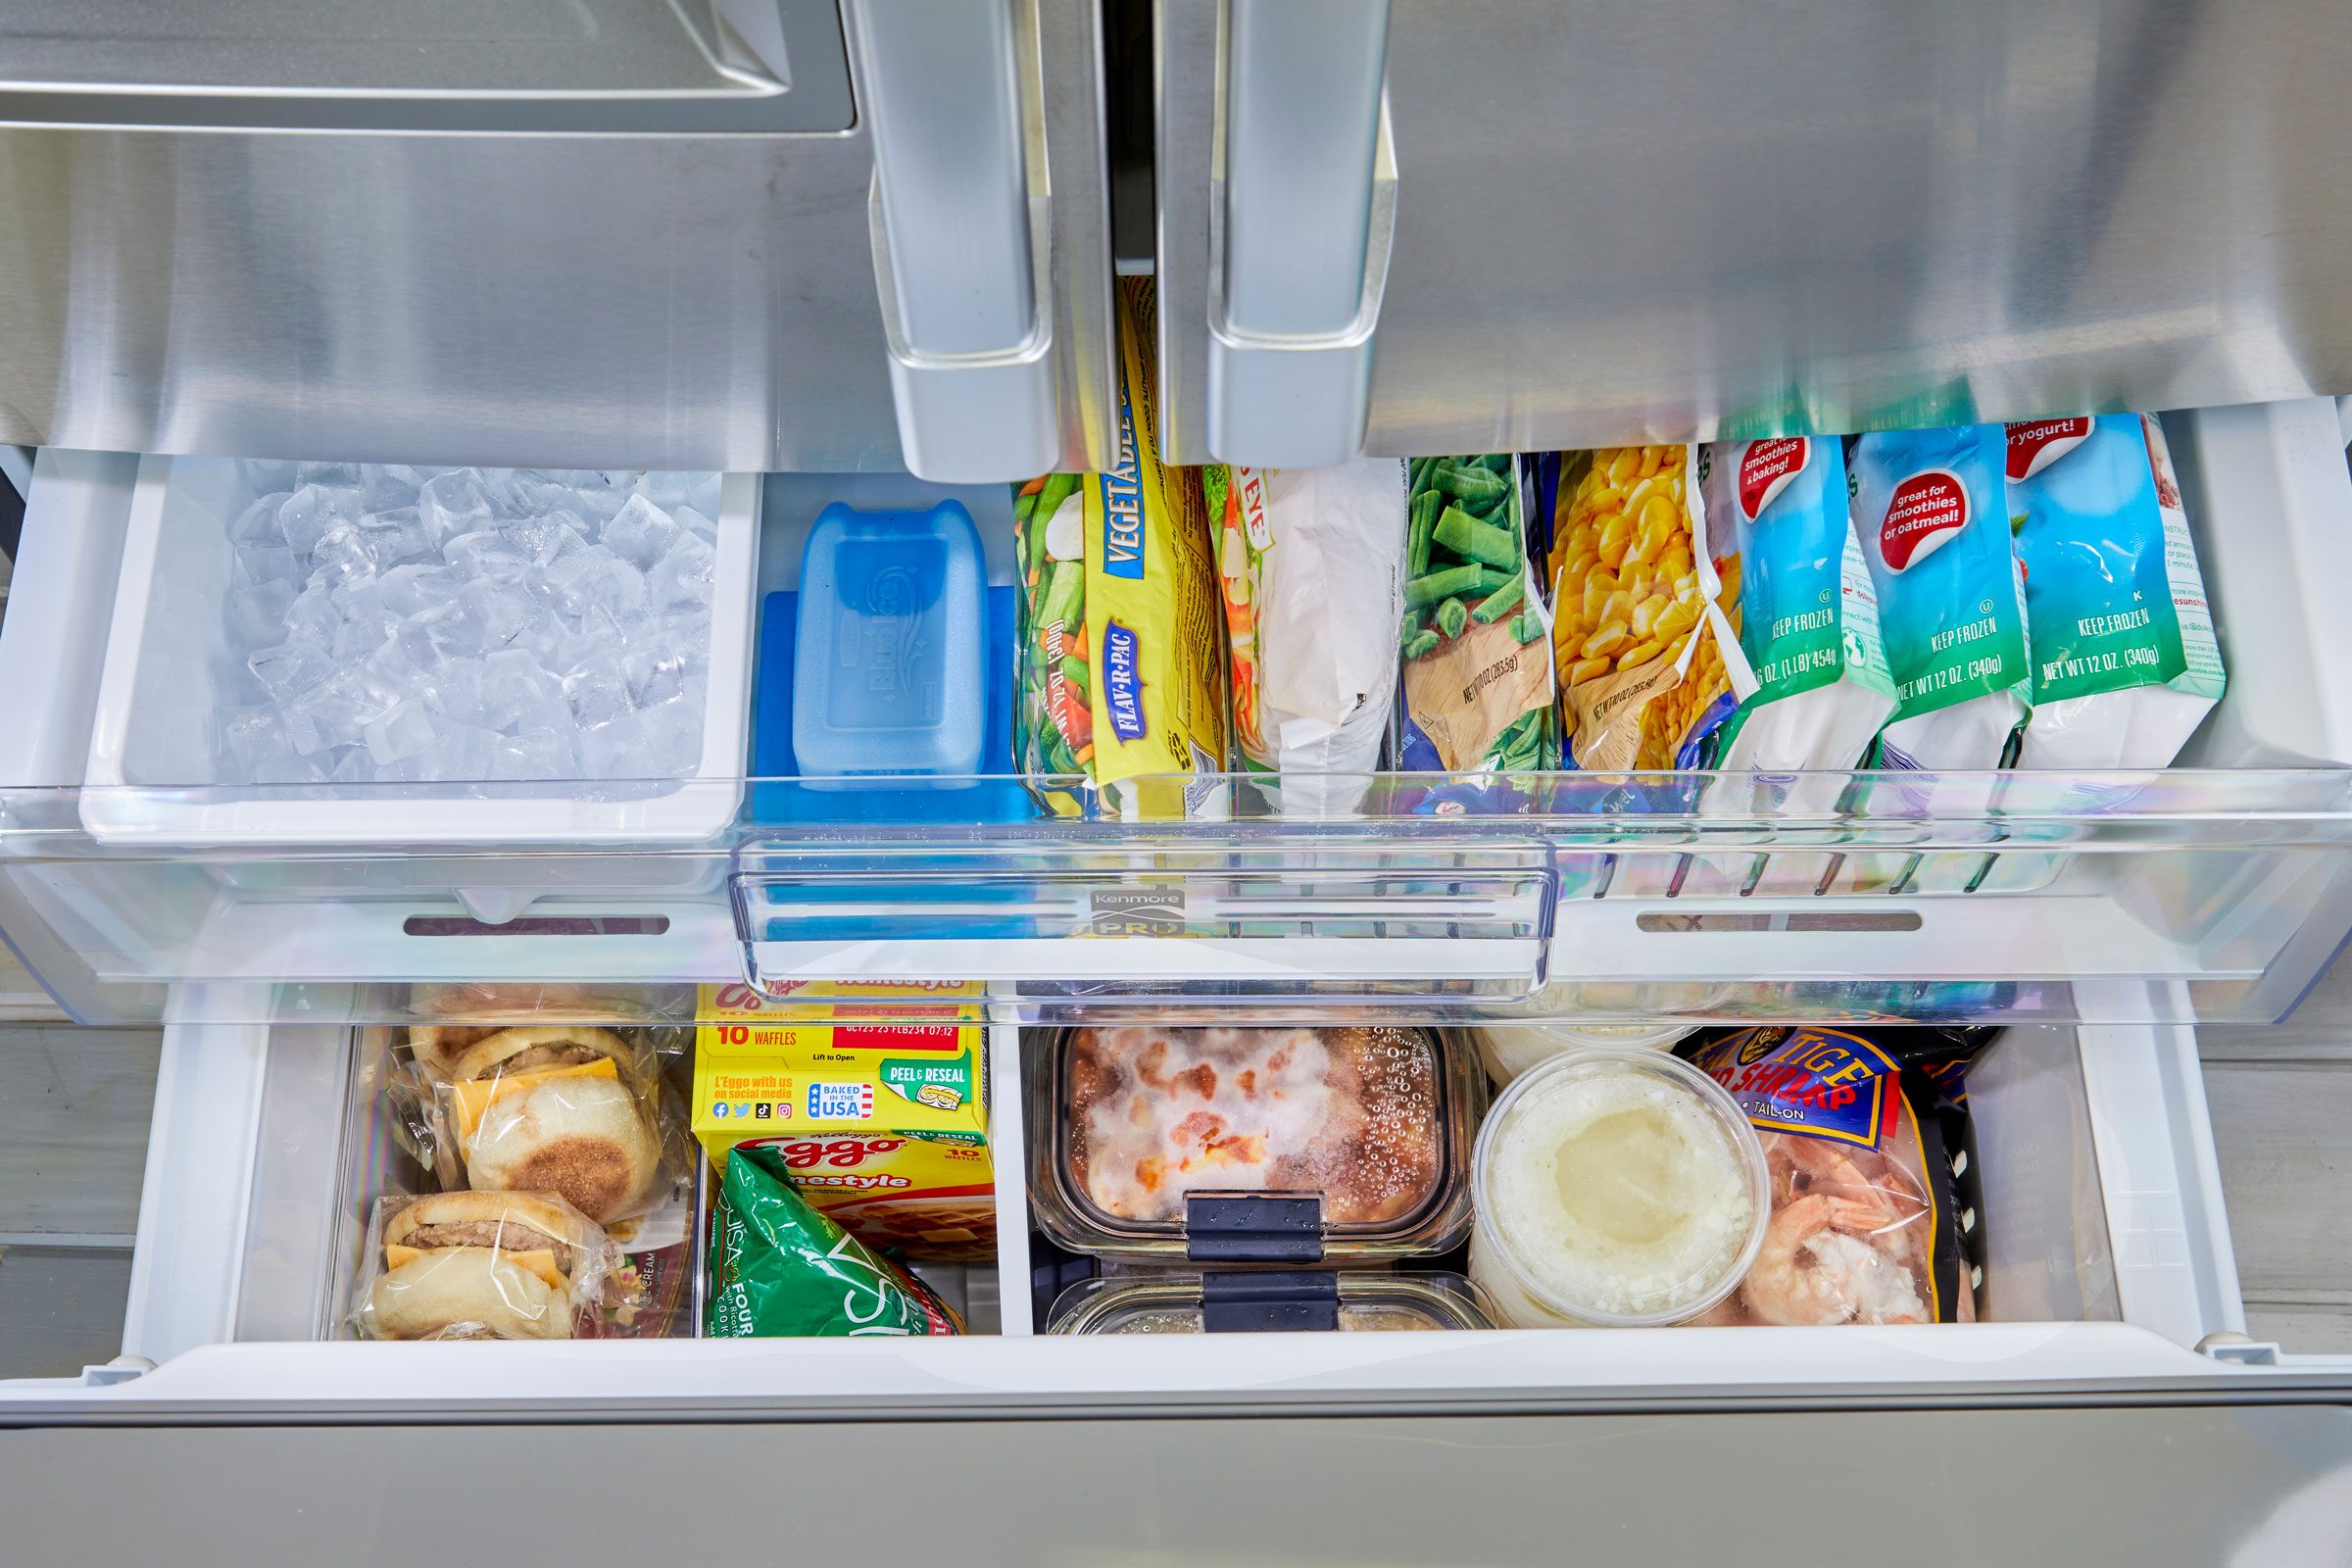 Now, Organise Your Refrigerator Like A Pro With These Containers - 5 Options